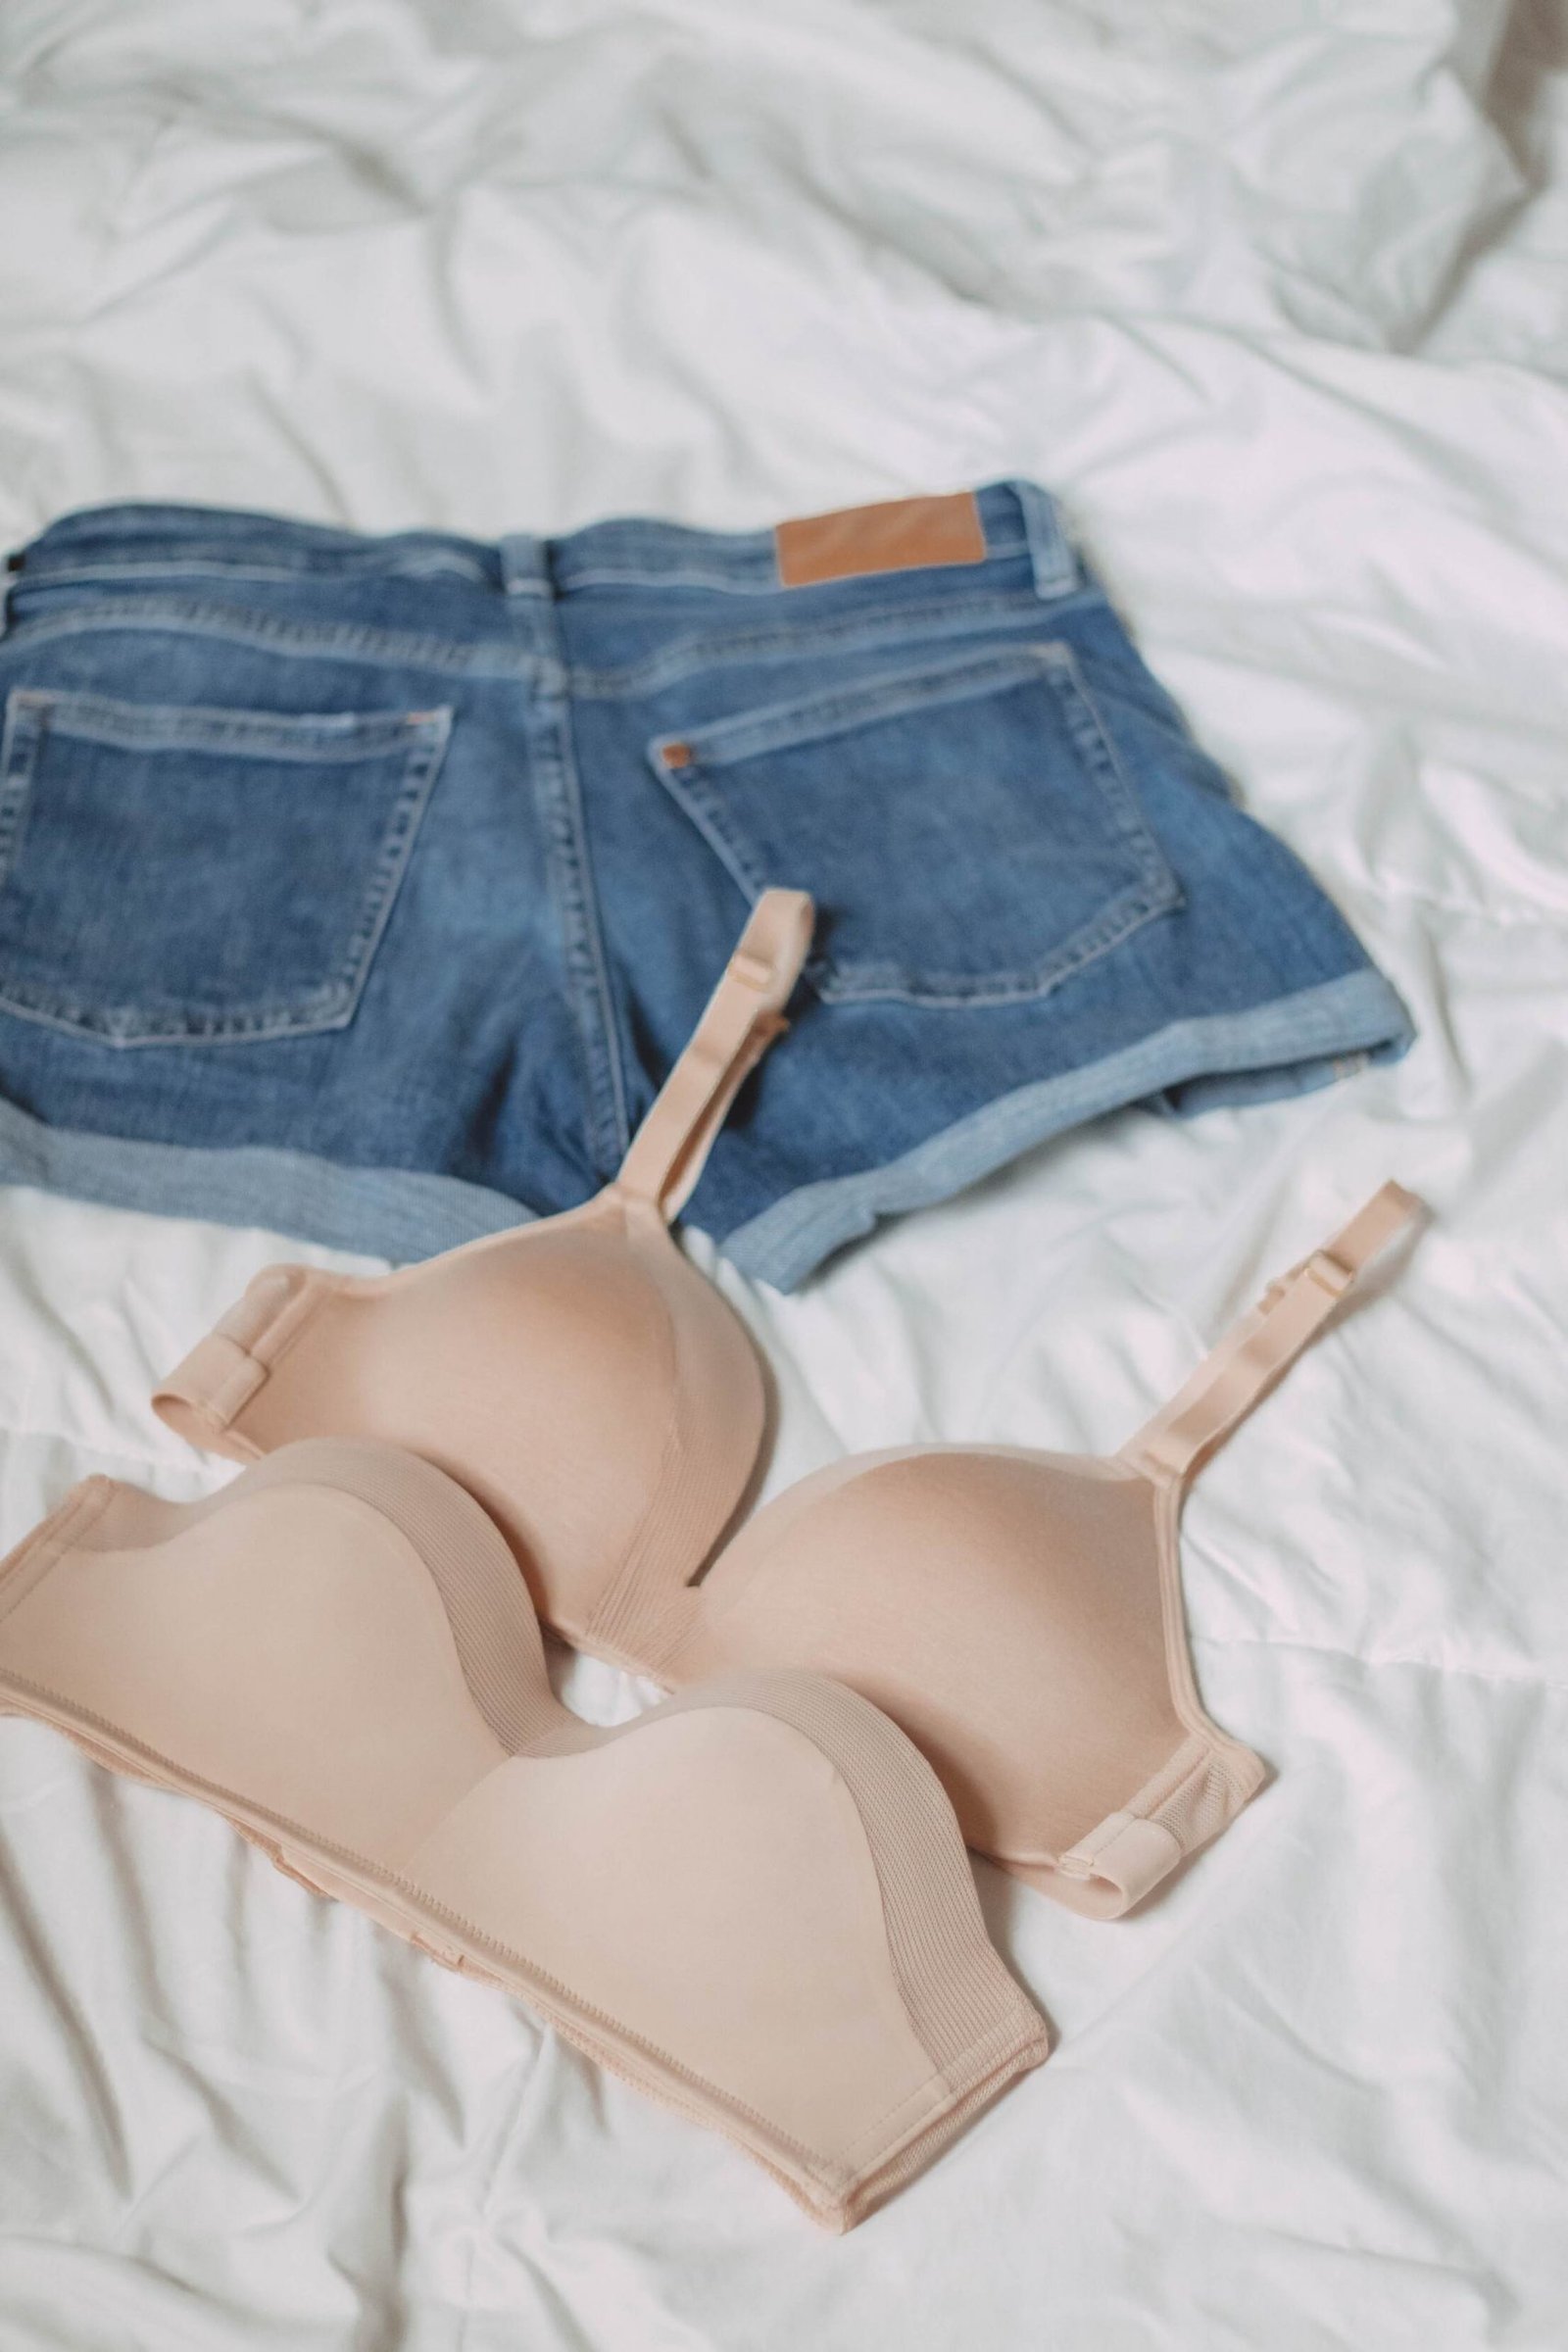 2 Lively Bras You Need To Invest In Right Away